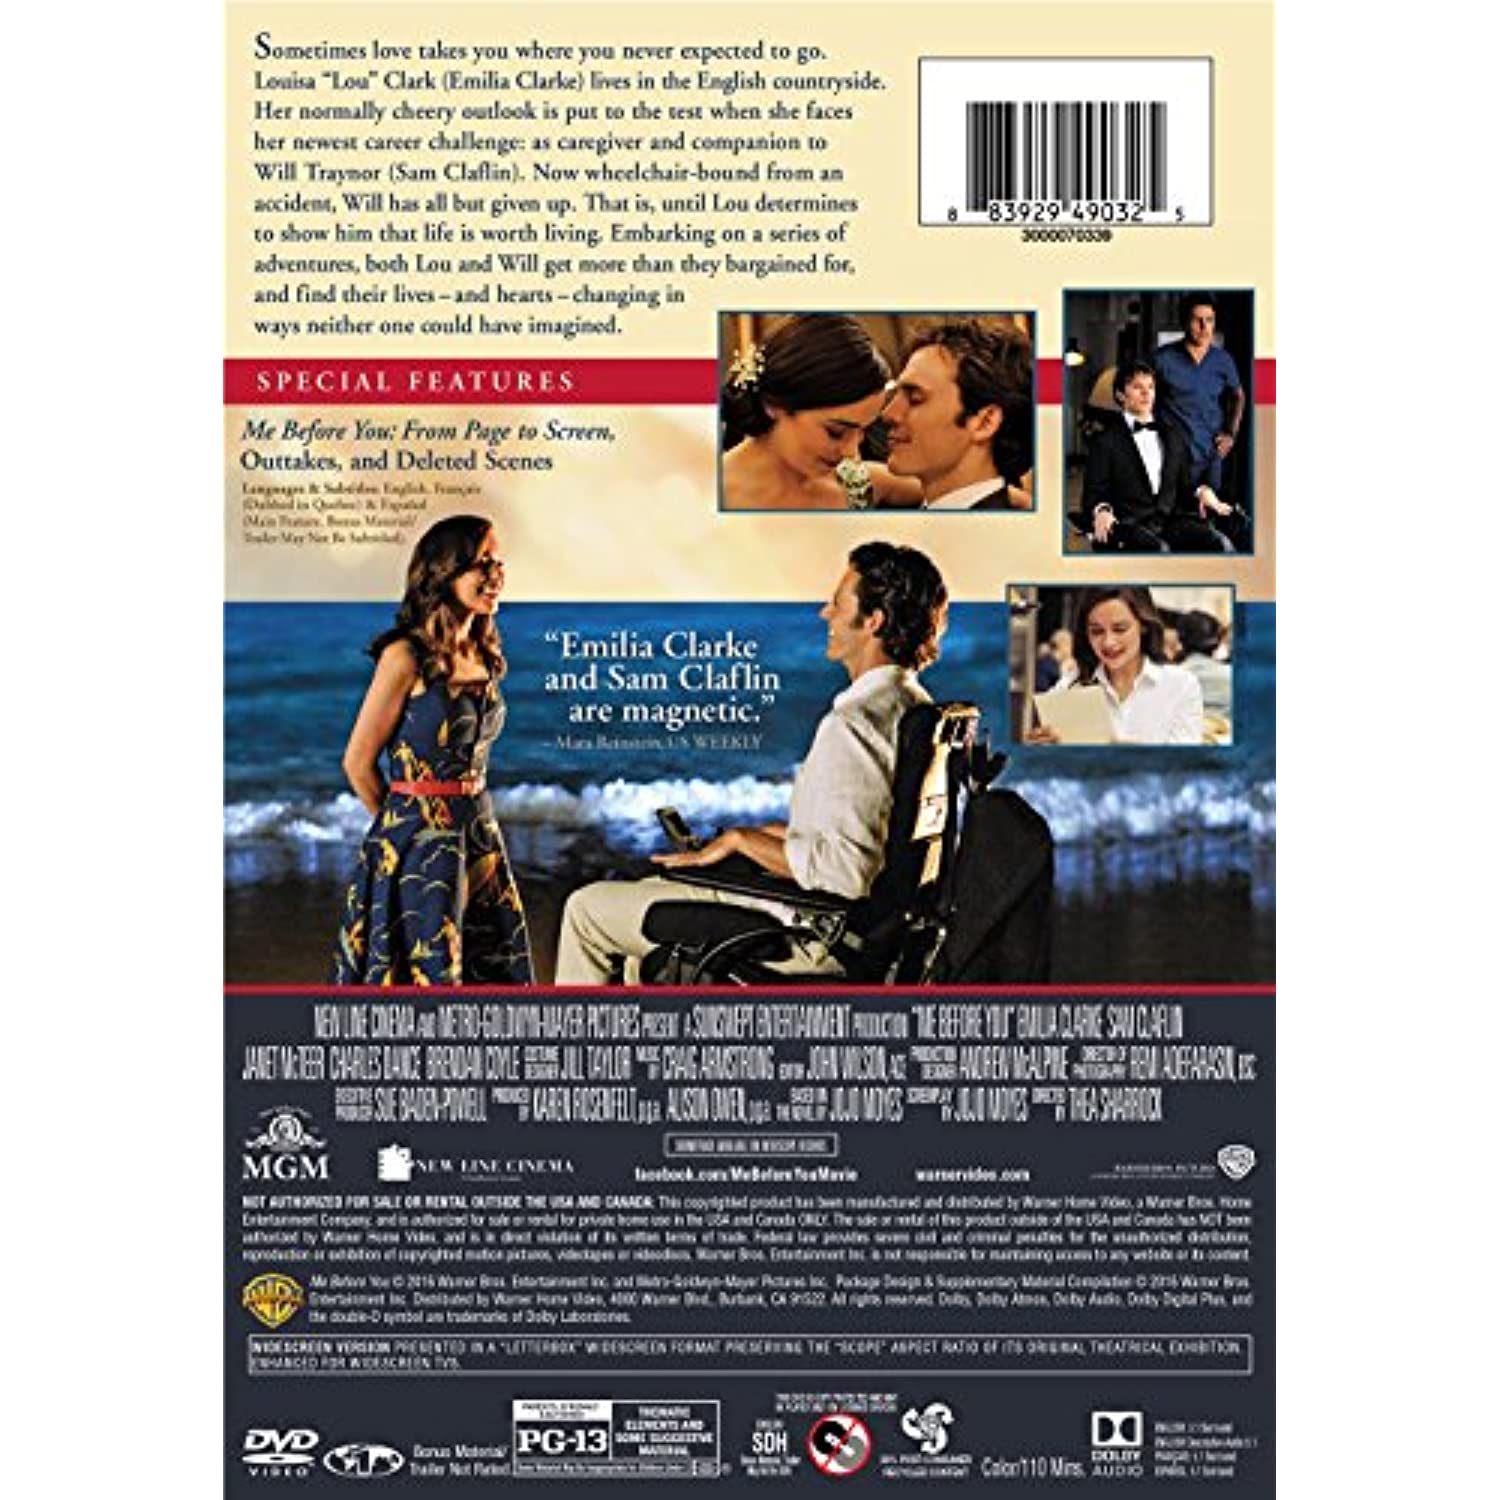 Me Before You (DVD), New Line Home Video, Drama - image 2 of 2